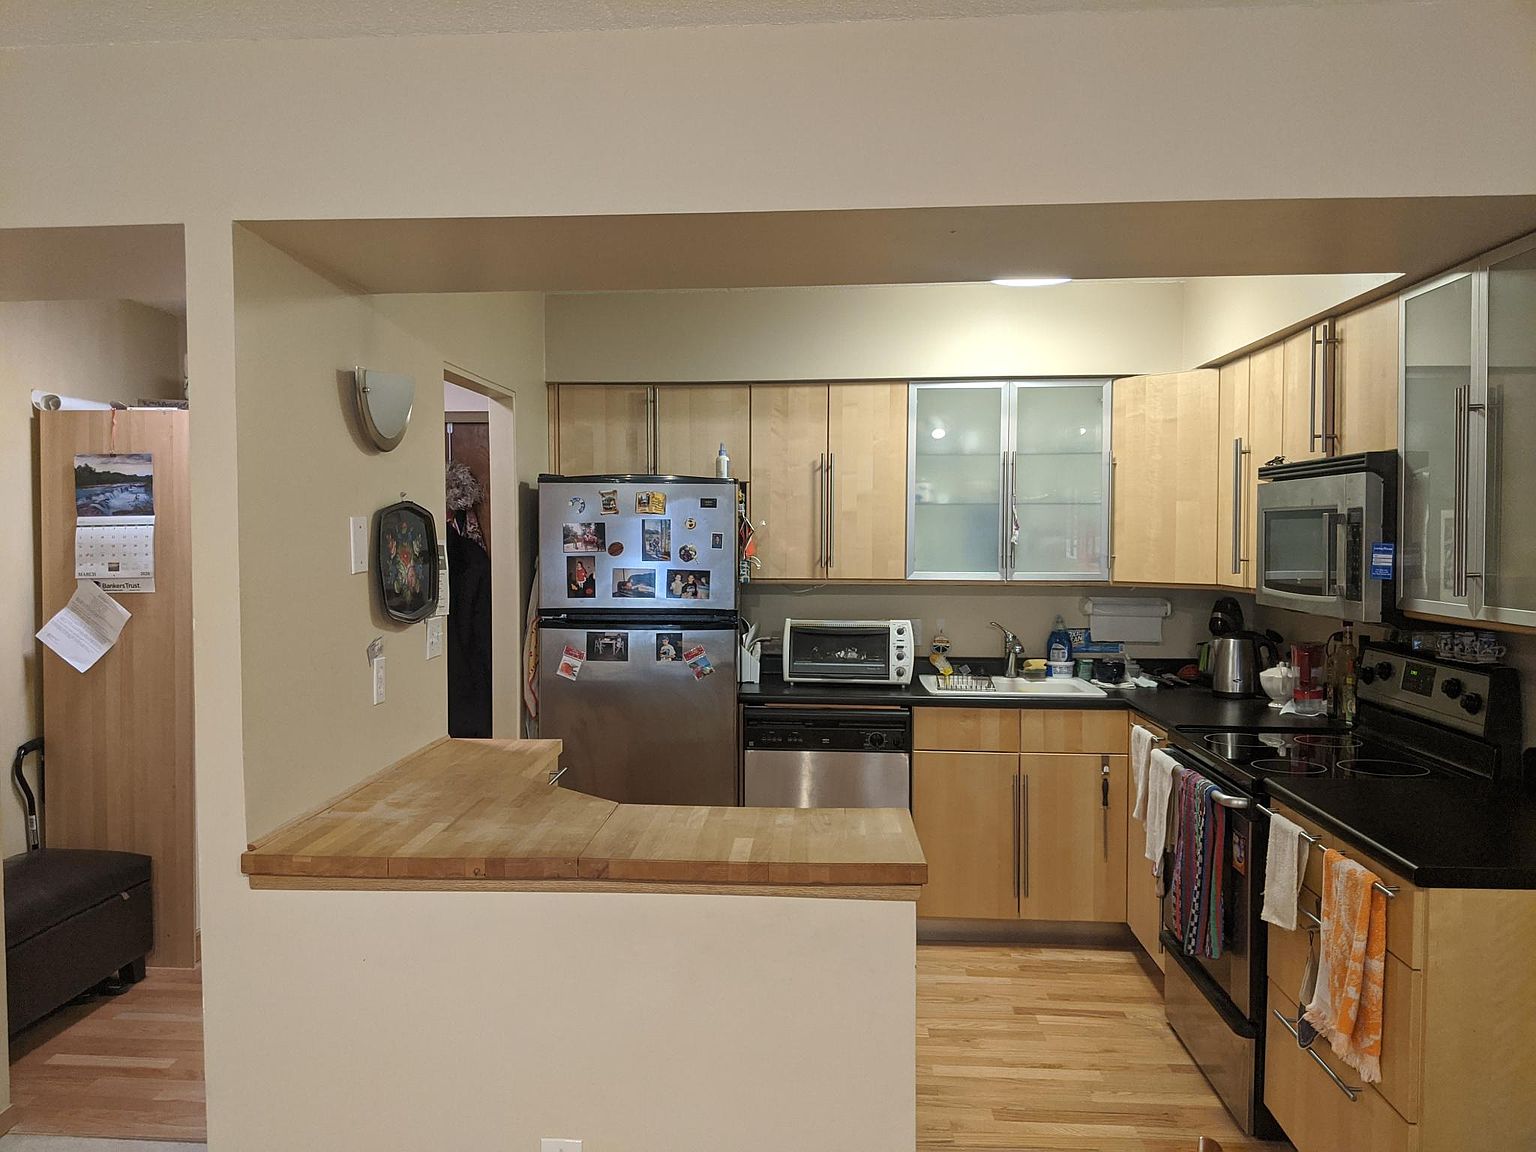 3100 Grand Ave Apt 5i Des Moines Ia 50312 Zillow